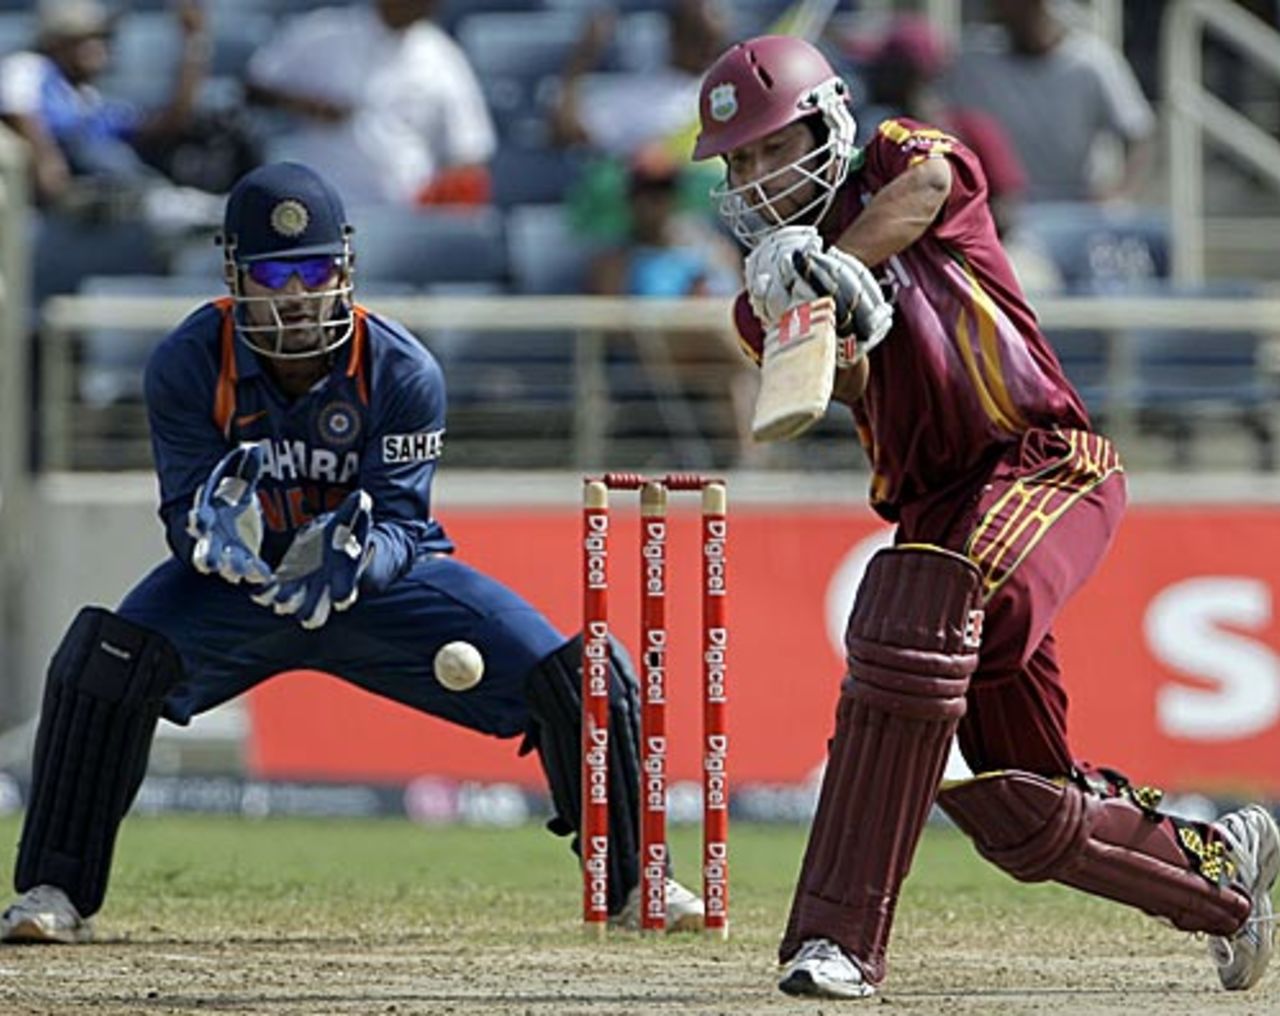 Ramnaresh Sarwan was stumped by MS Dhoni for 15, West Indies v India, 2nd ODI, Kingston, June 28, 2009 